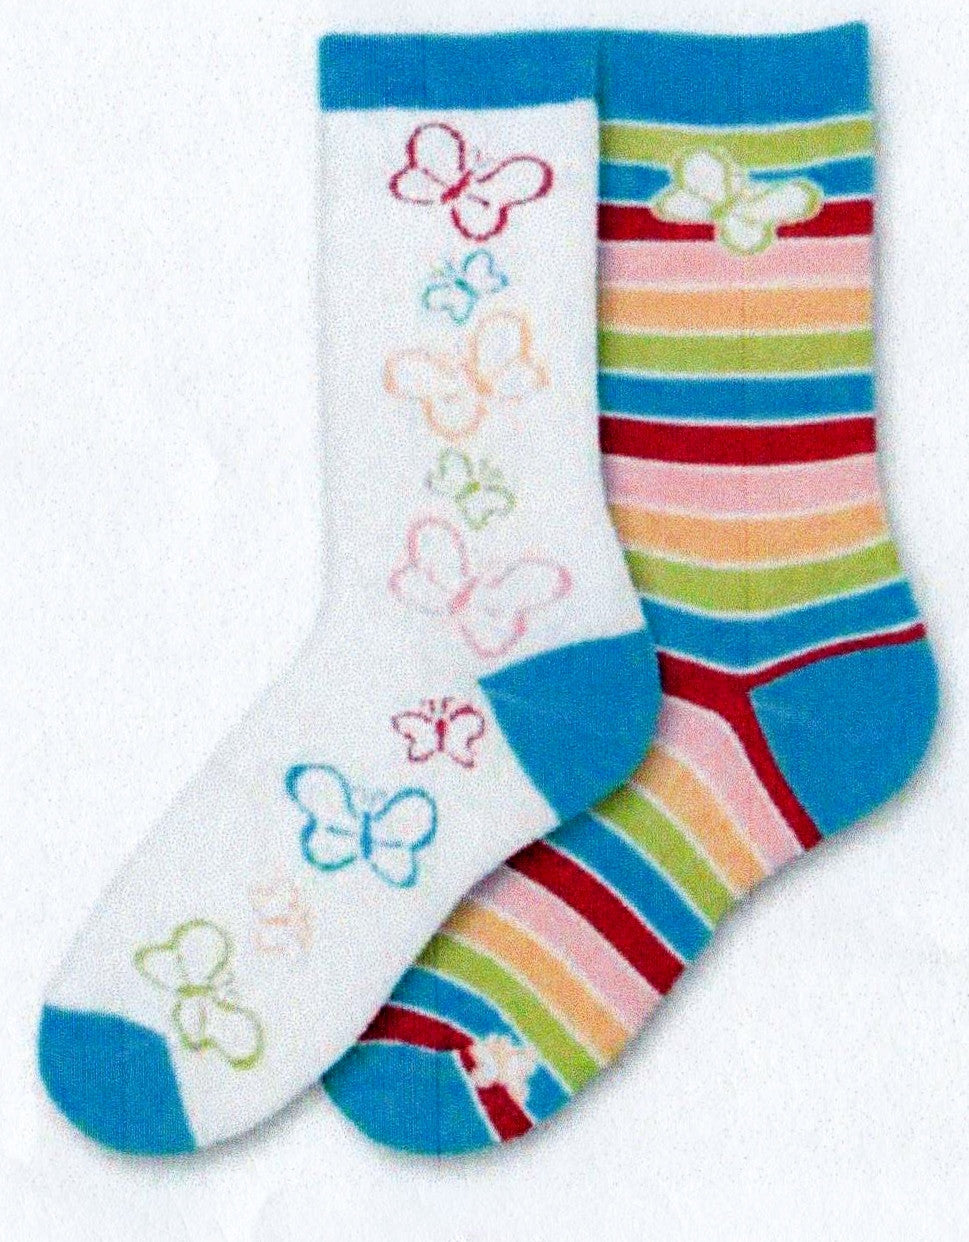 FBF Butterfly Mismatch Socks are paired together perfectly. One is a White Background with many different Colored Butterflies with Reds, Blues and Greens. Both Socks the Cuff, Heels and Toes are Blue. The other sock has rows of stripes with only a Big Butterfly at the Cuff and a Small Butterfly at the Toe.